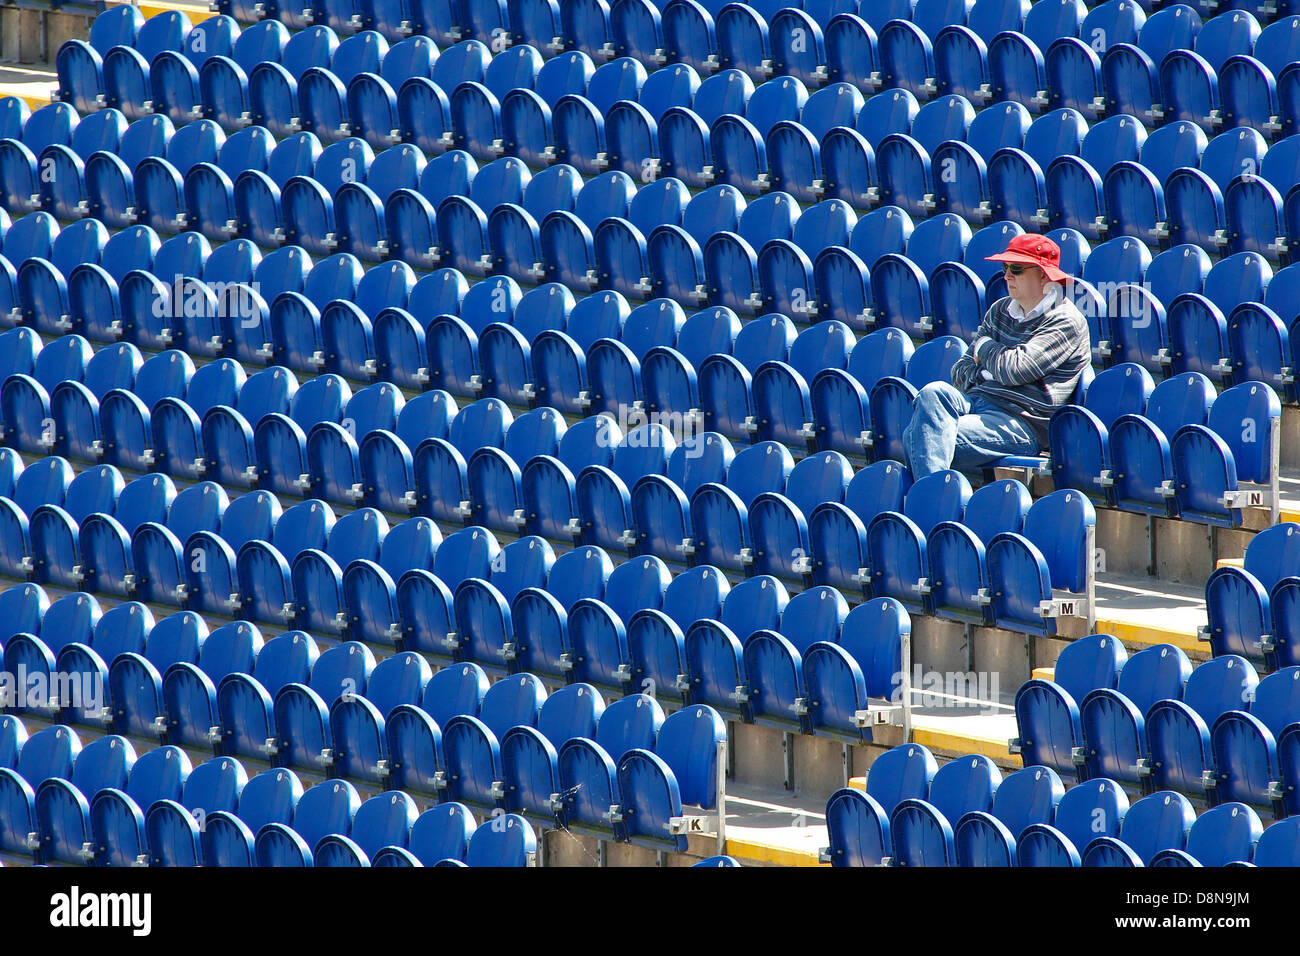 cardiff-wales-june-01-a-fan-sits-alone-in-an-empty-stand-during-the-D8N9JM.jpg